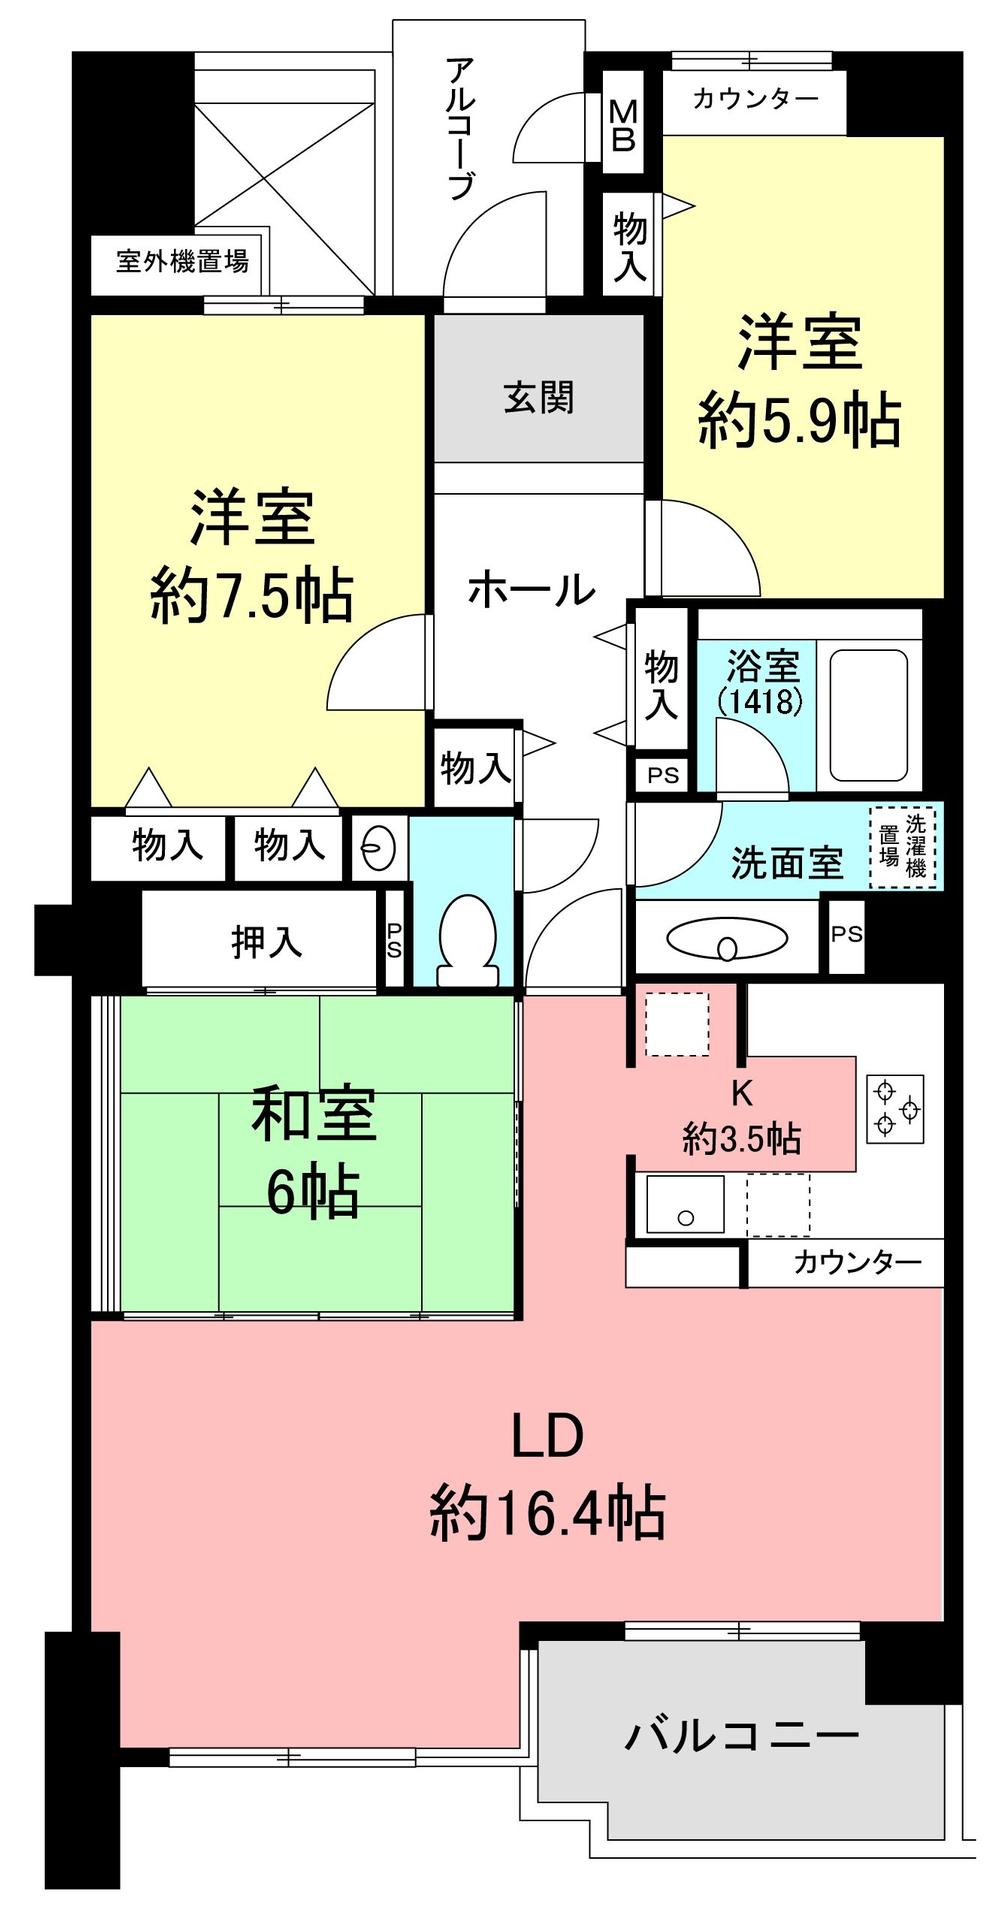 Floor plan. 3LDK, Price 25,700,000 yen, Occupied area 87.65 sq m , Balcony area 6.15 sq m south-facing bright rooms, Privacy is also secured in Arukopu and Fukinuki from the corridor